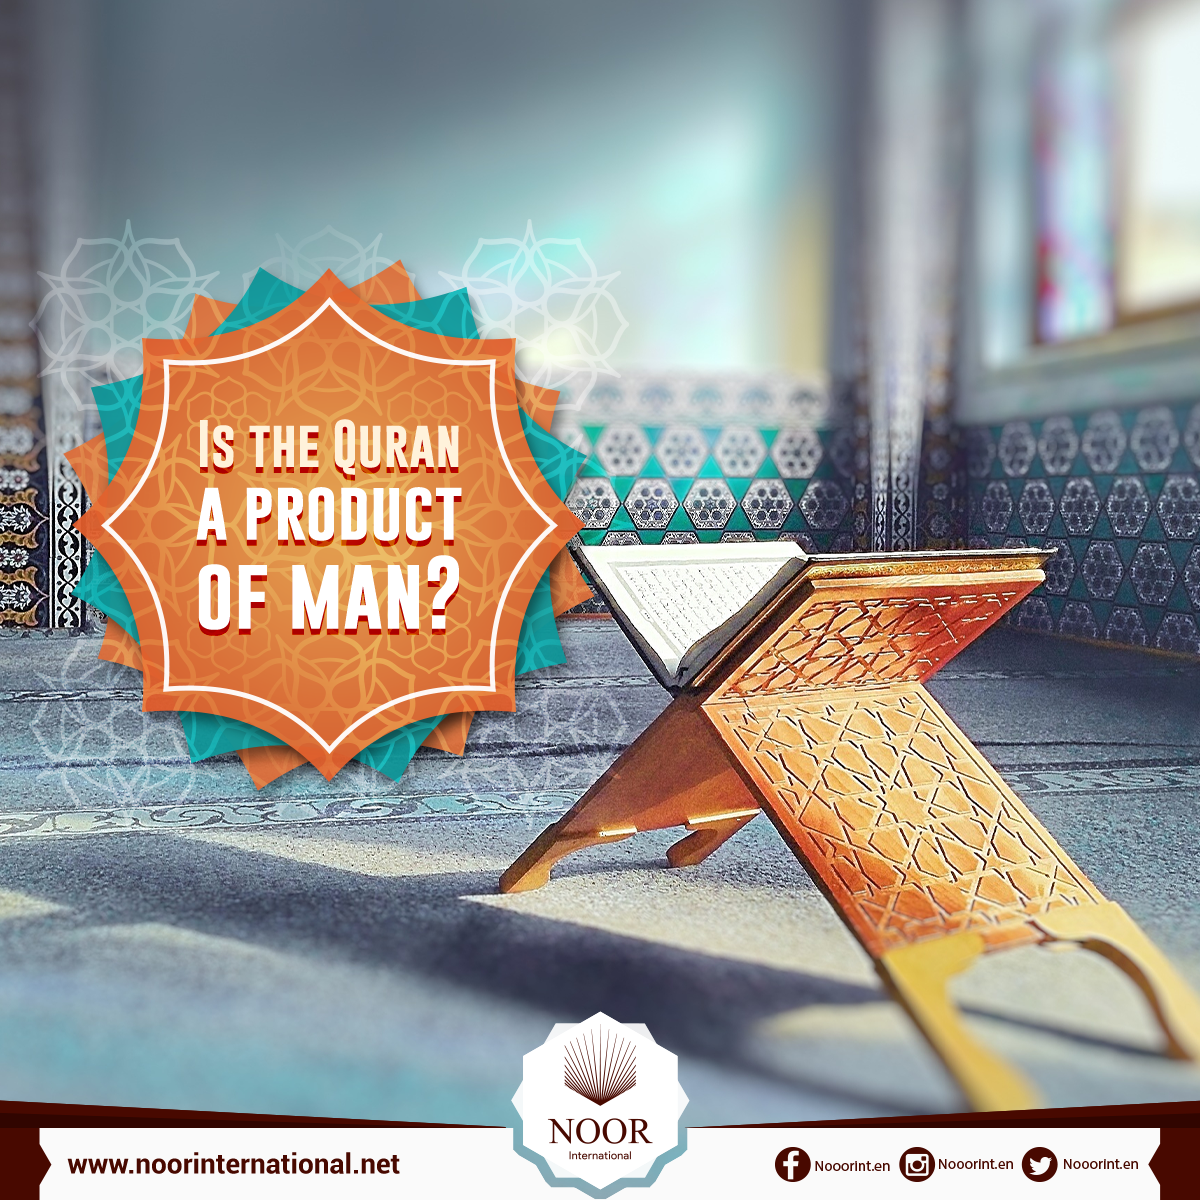 Is the Quran a product of man?